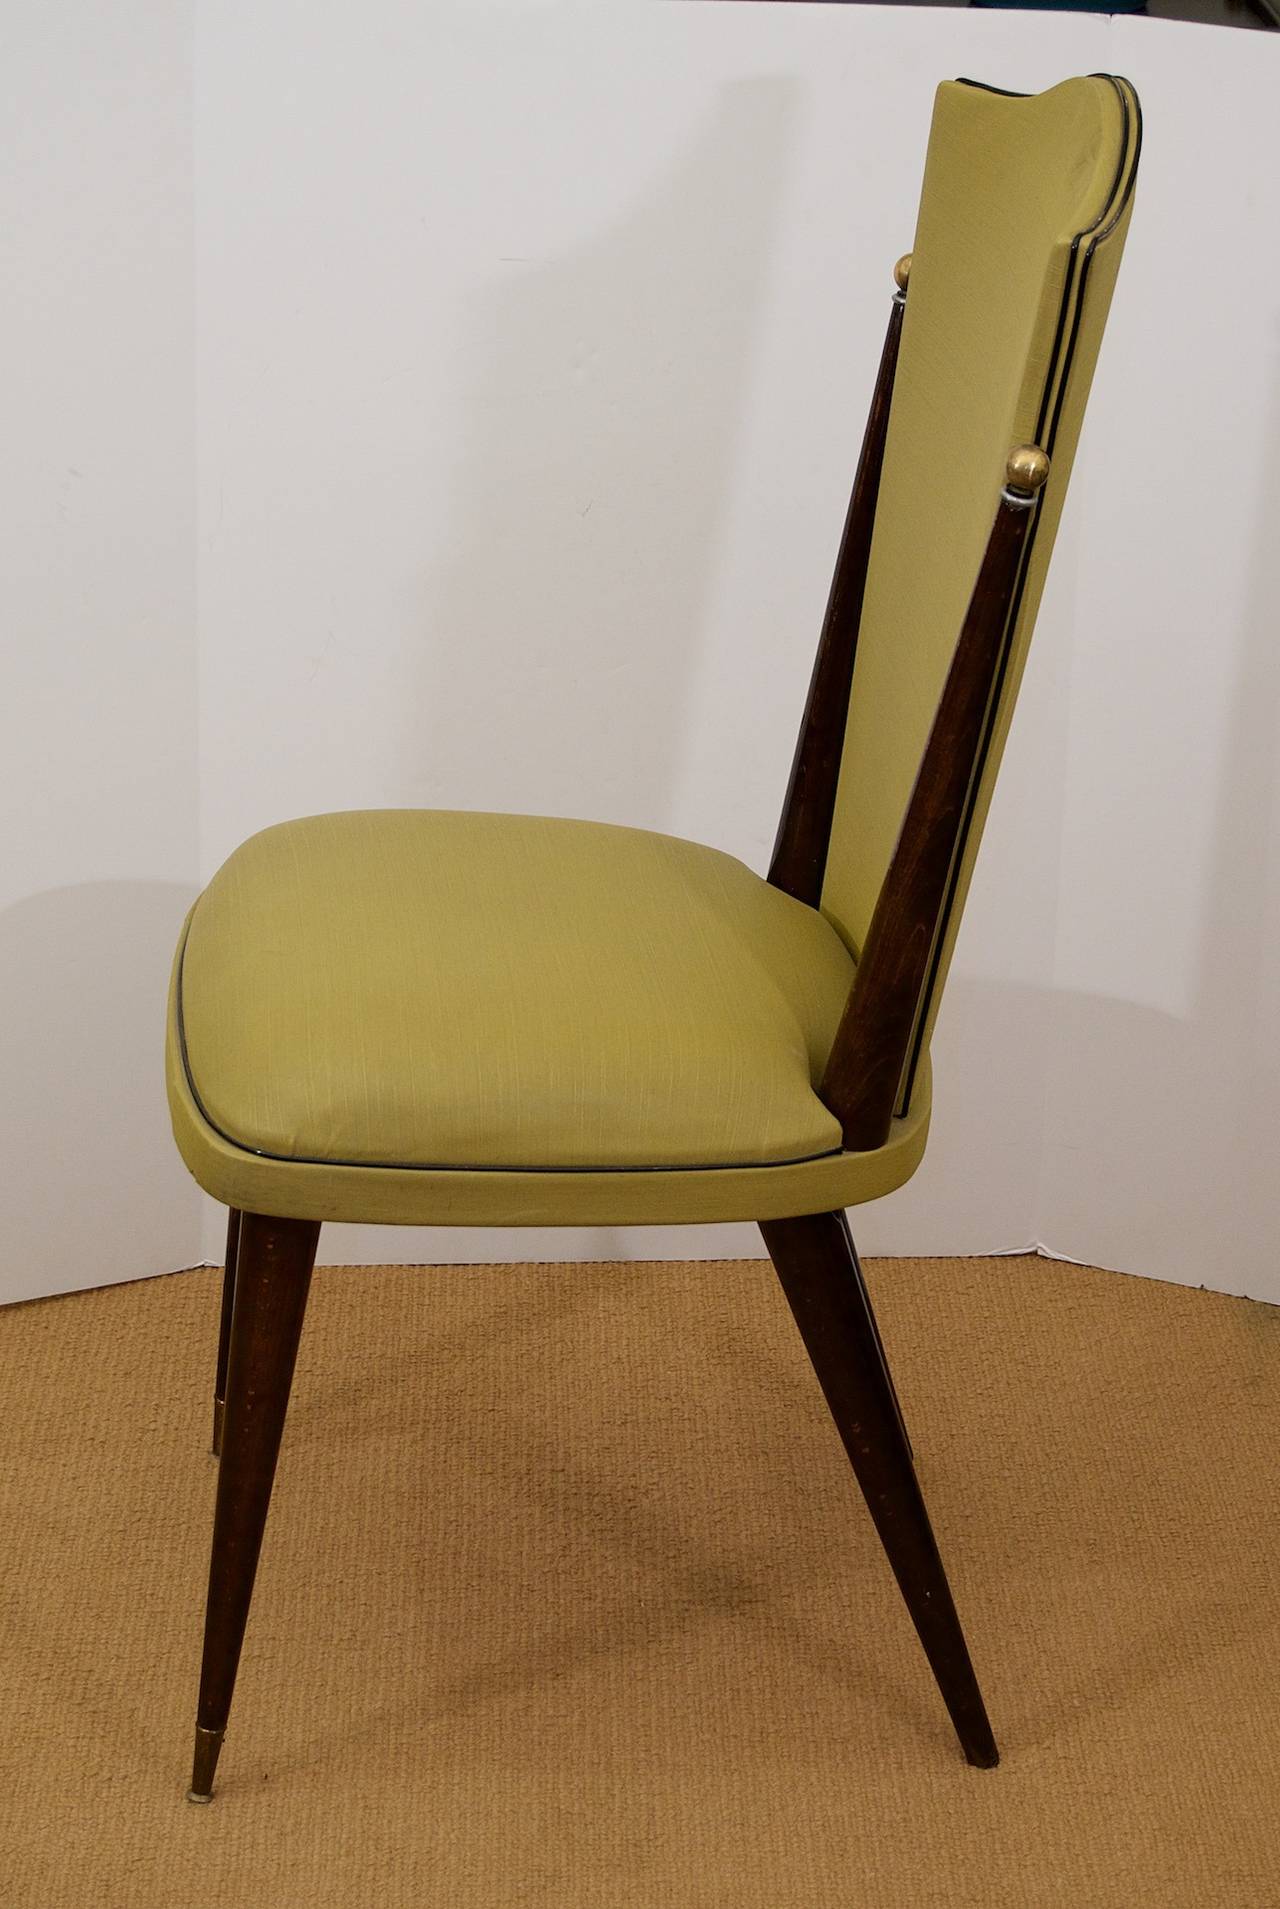 An excellently proportioned set of four dining chairs of Art Deco style. Wood is finished in a satin ebony, with original upholstery.

Turned brass balls at the caps of the back support and sabot on front legs.

Extremely comfortable and